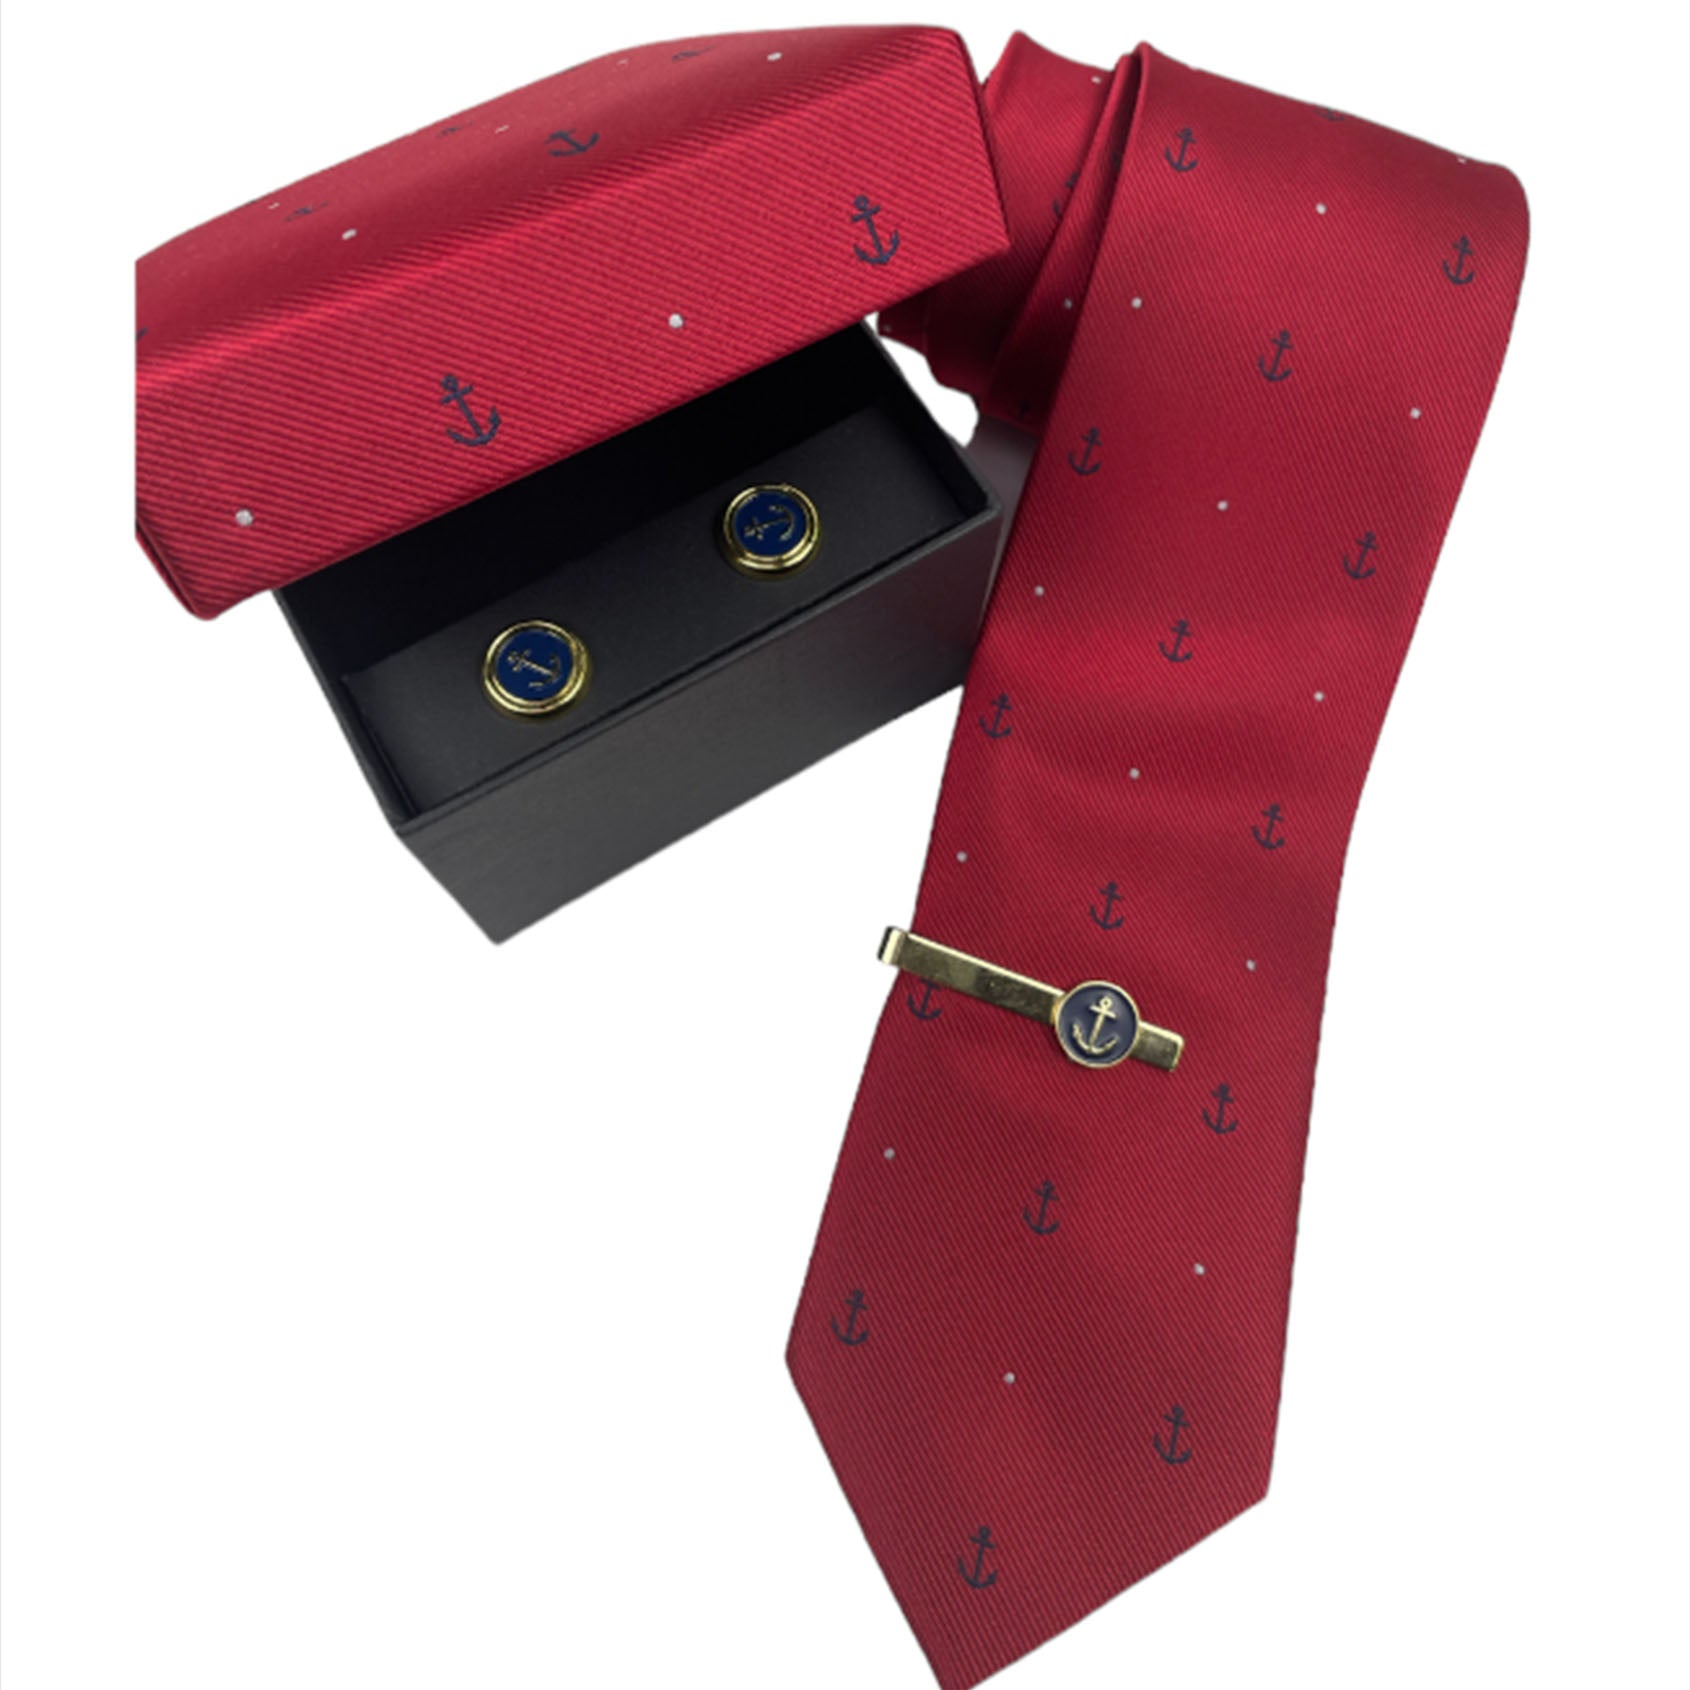 Red gift set with tie pin, tie and cufflinks